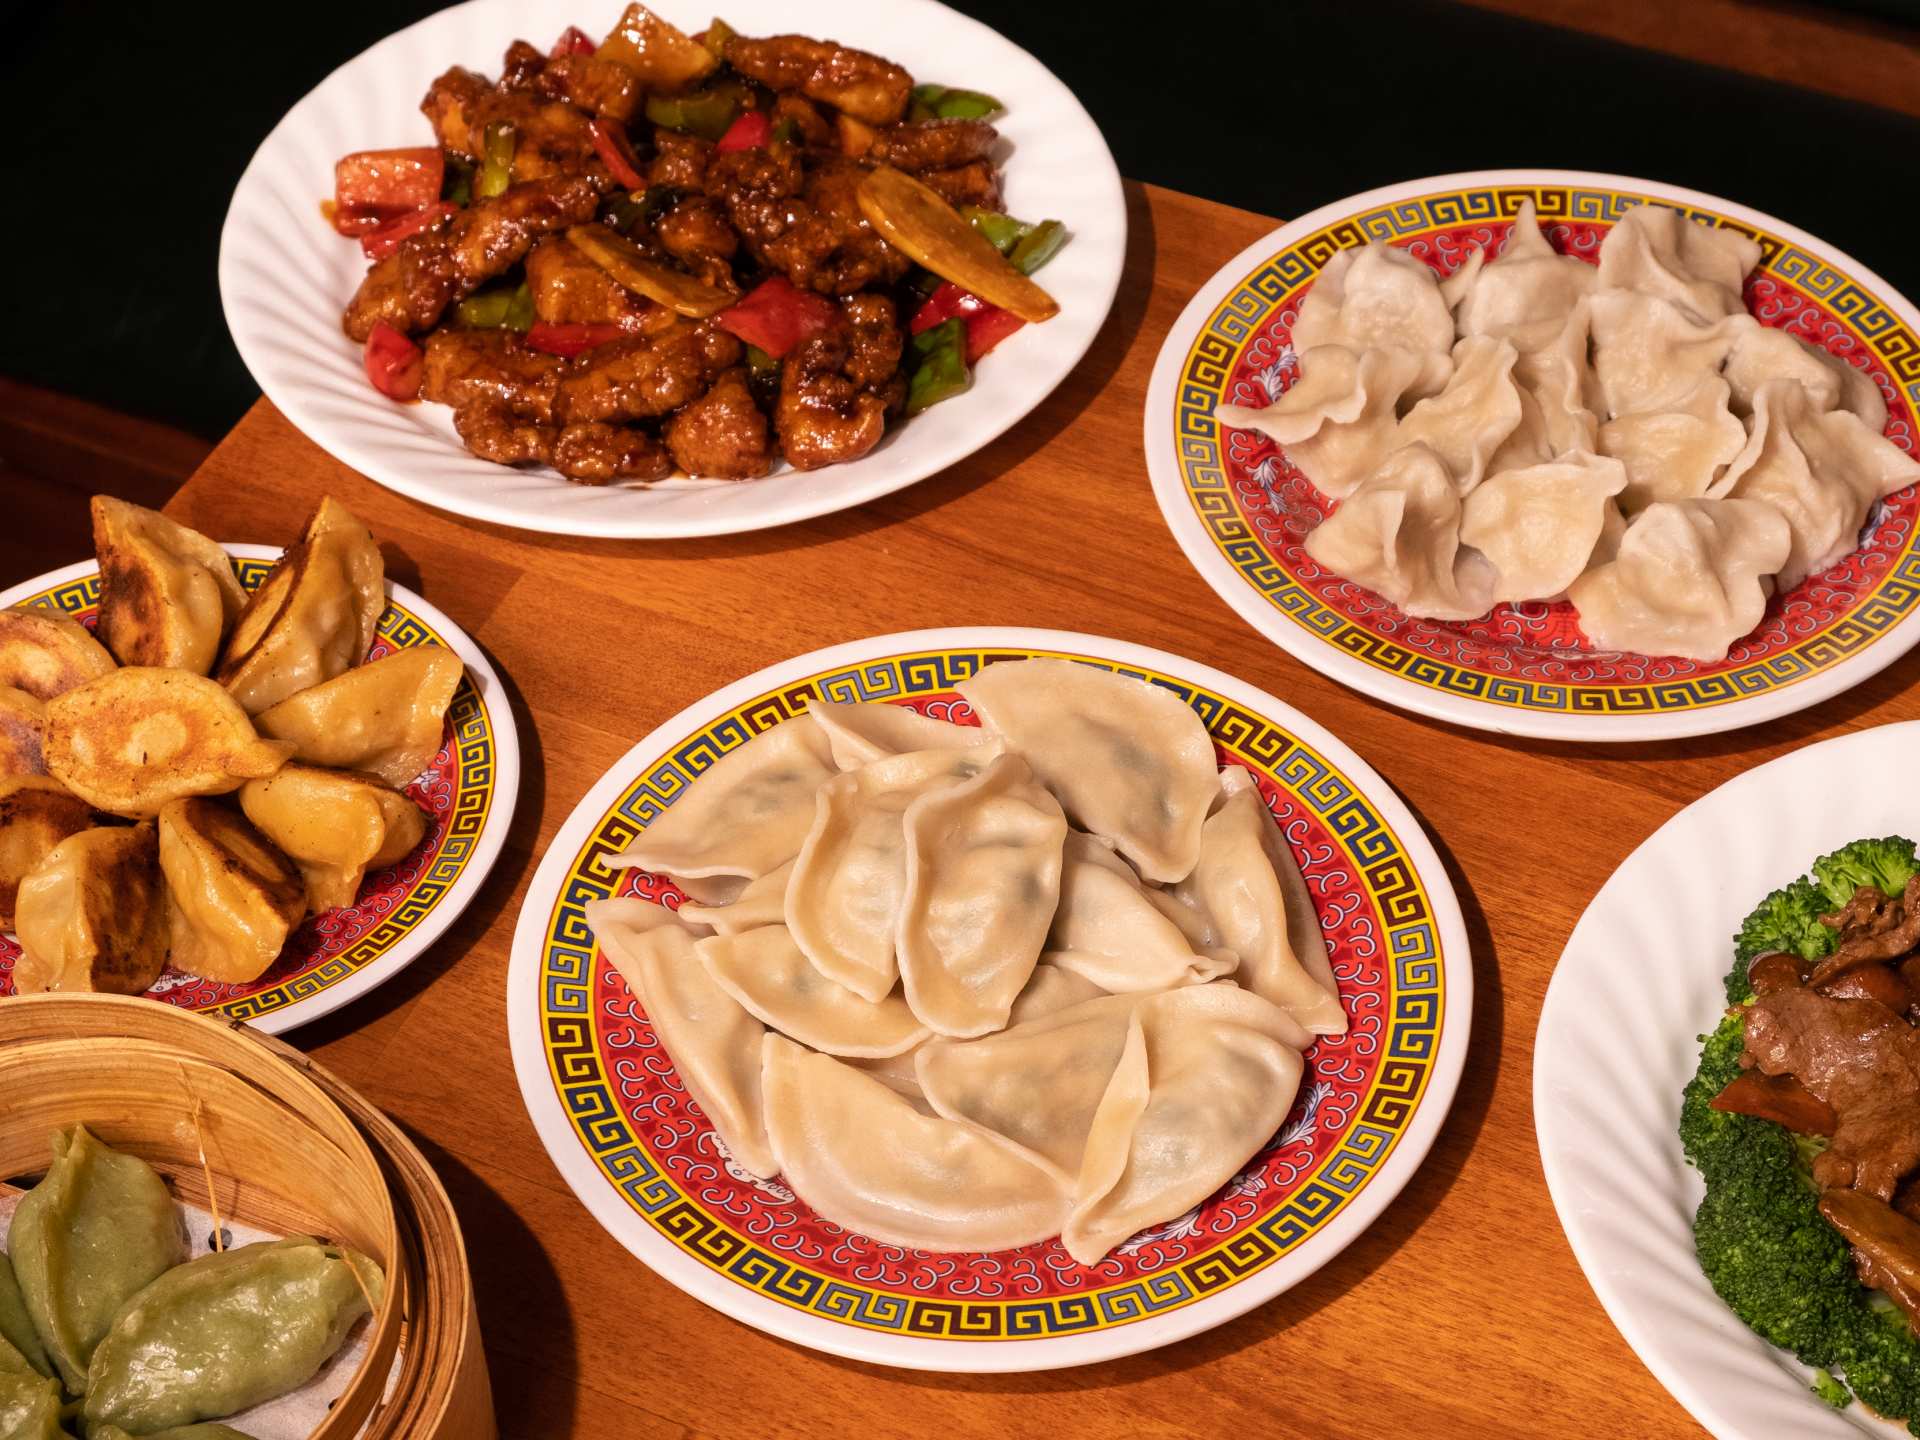 Cheap eats | Dumplings and other dishes from Mother's Dumplings